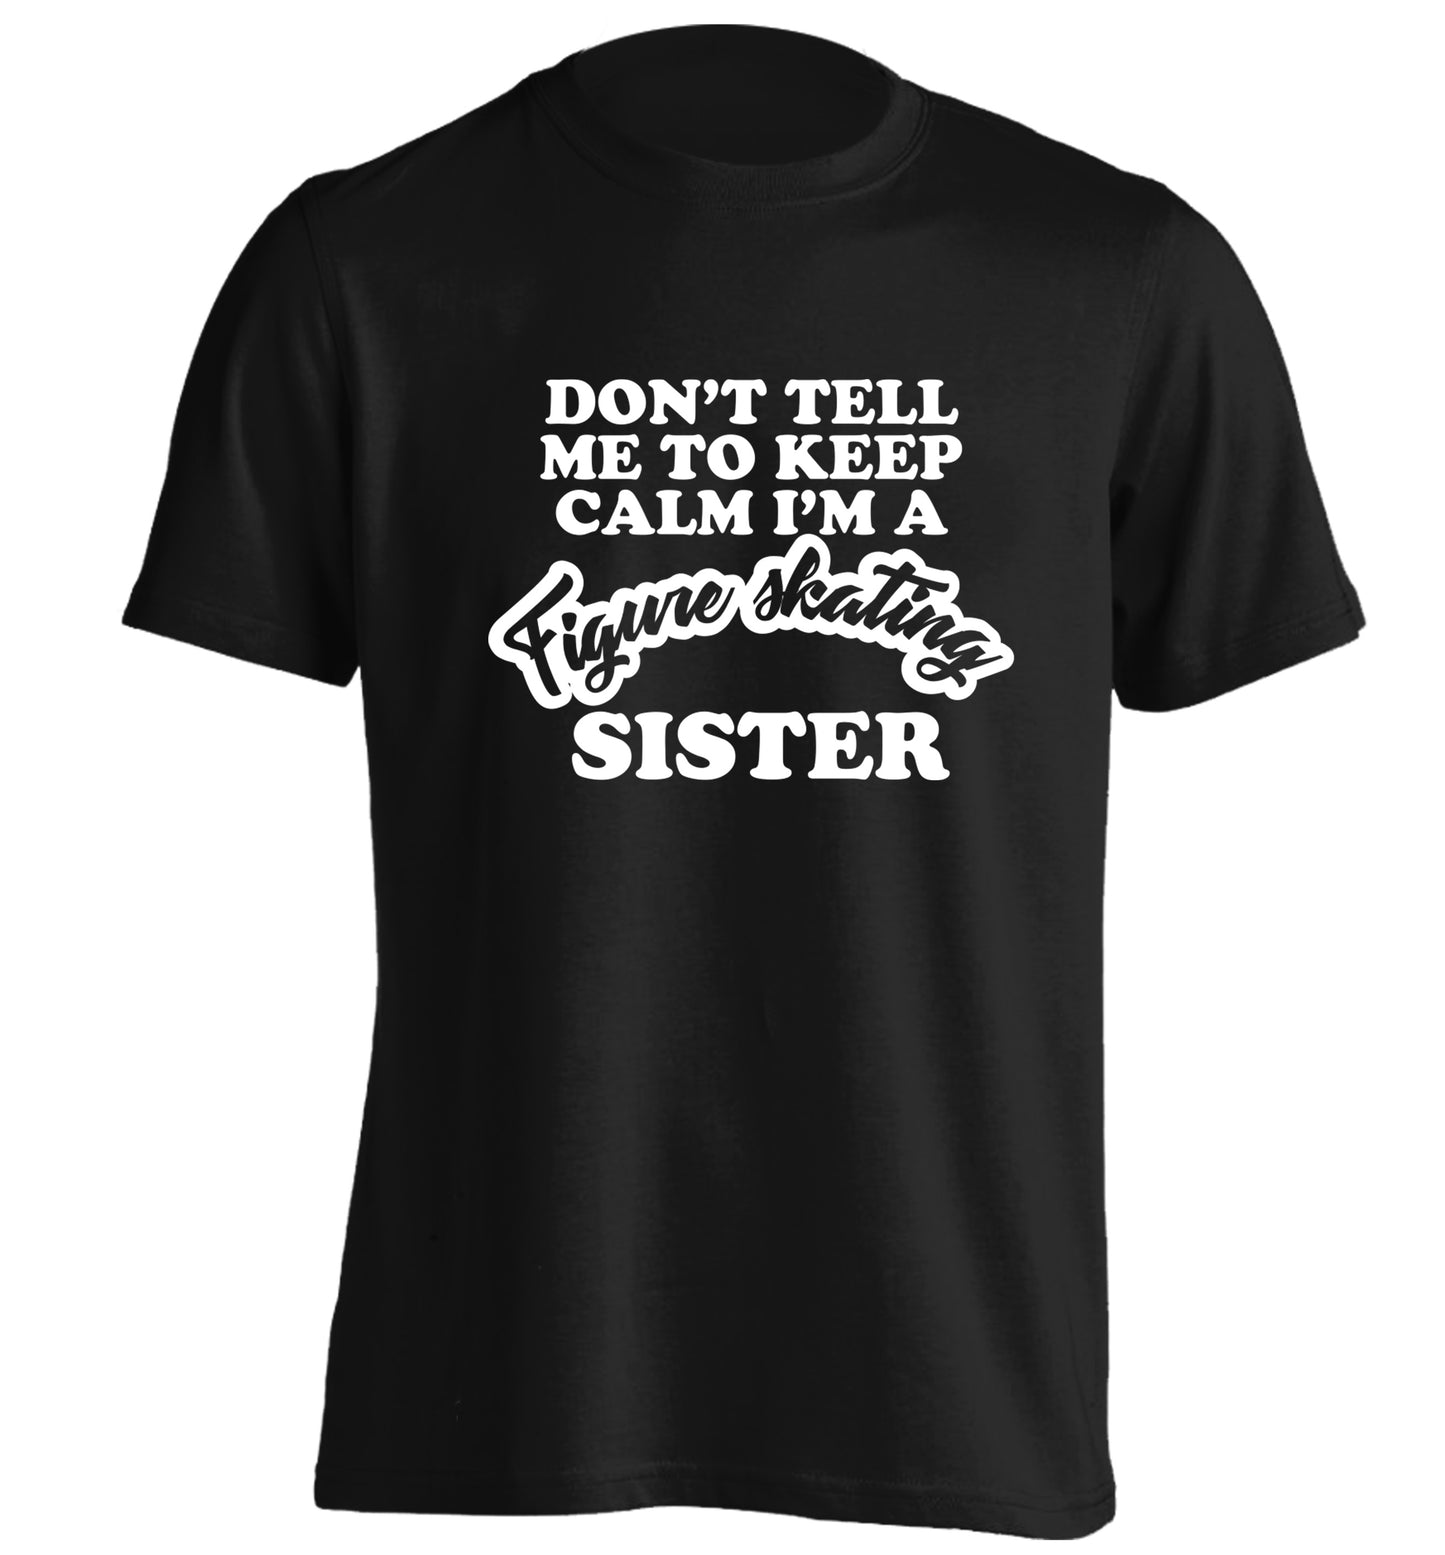 Don't tell me to keep calm I'm a figure skating sister adults unisexblack Tshirt 2XL